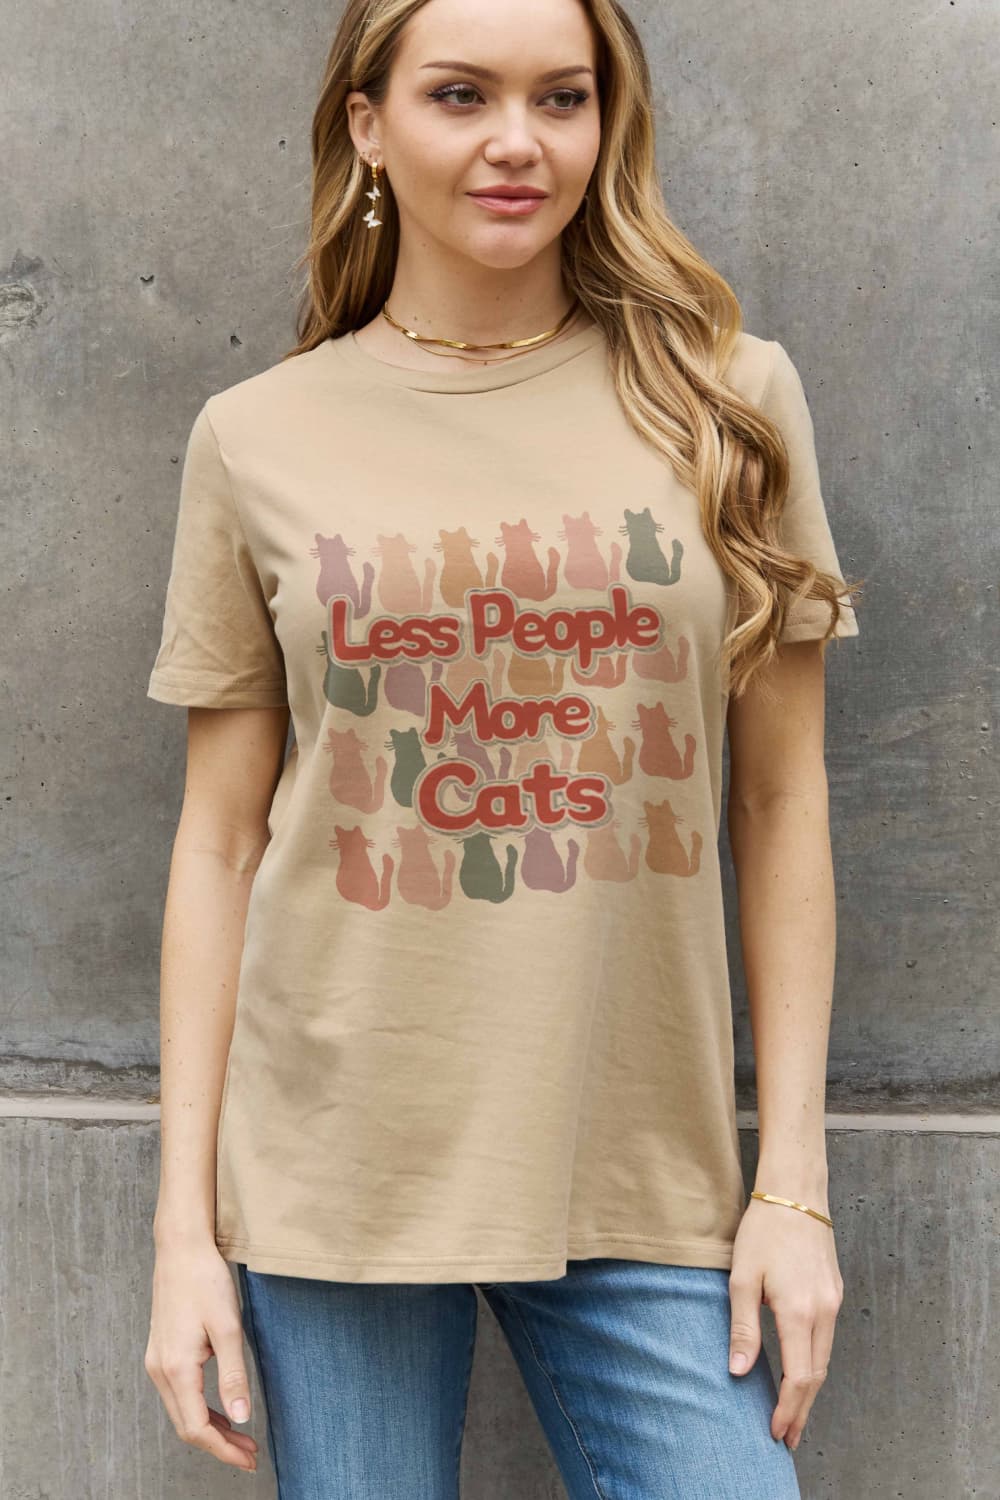 LESS PEOPLE MORE CATS Graphic Cotton Tee - Beige / S - T-Shirts - Shirts & Tops - 7 - 2024